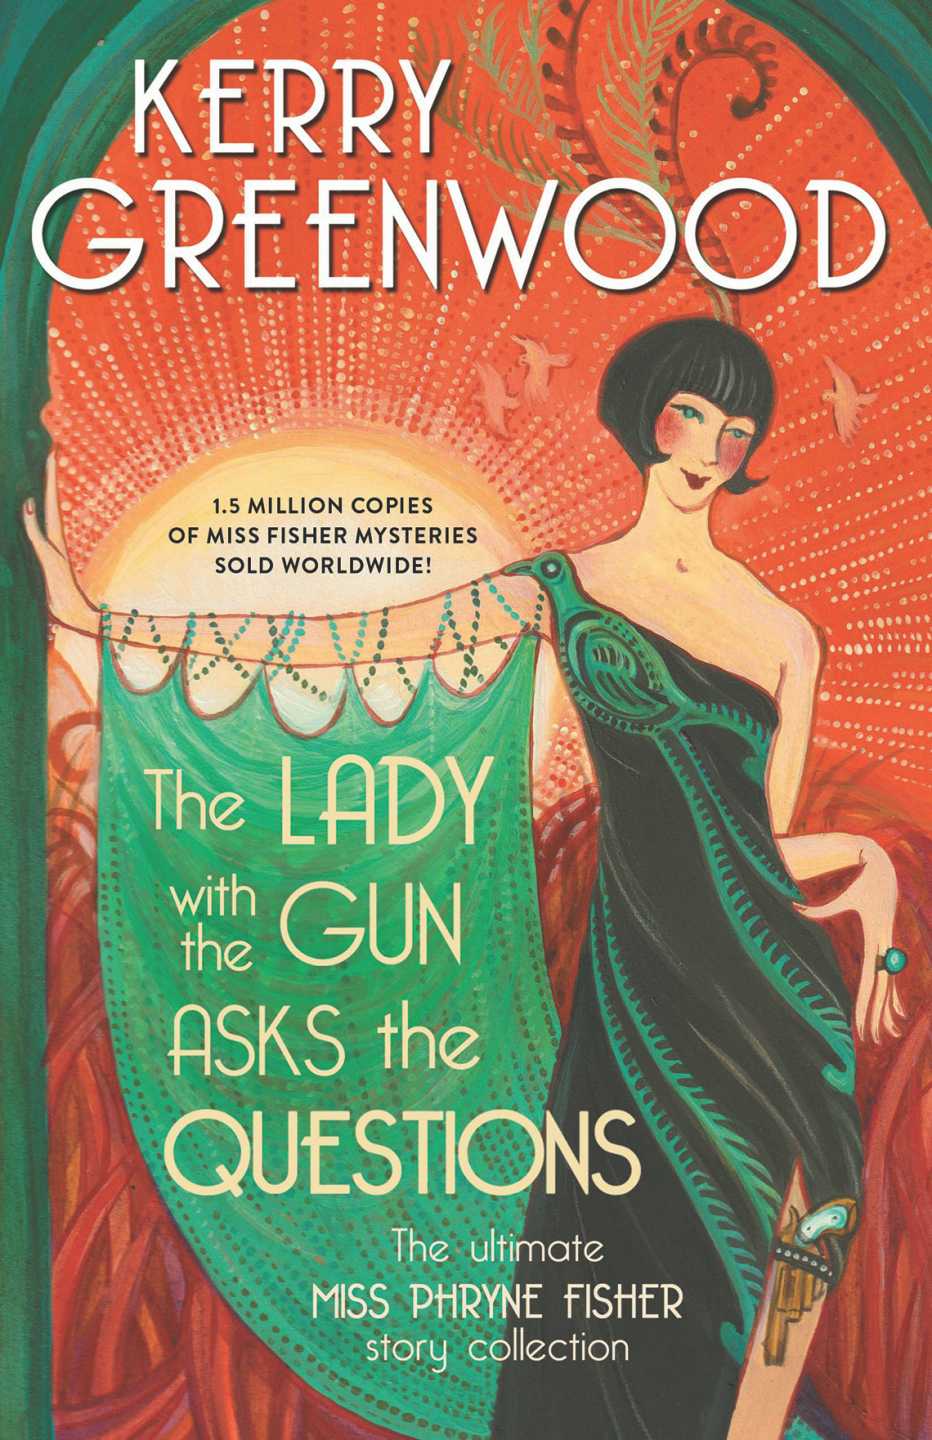 the lady with the gun asks the questions by kerry greenwood